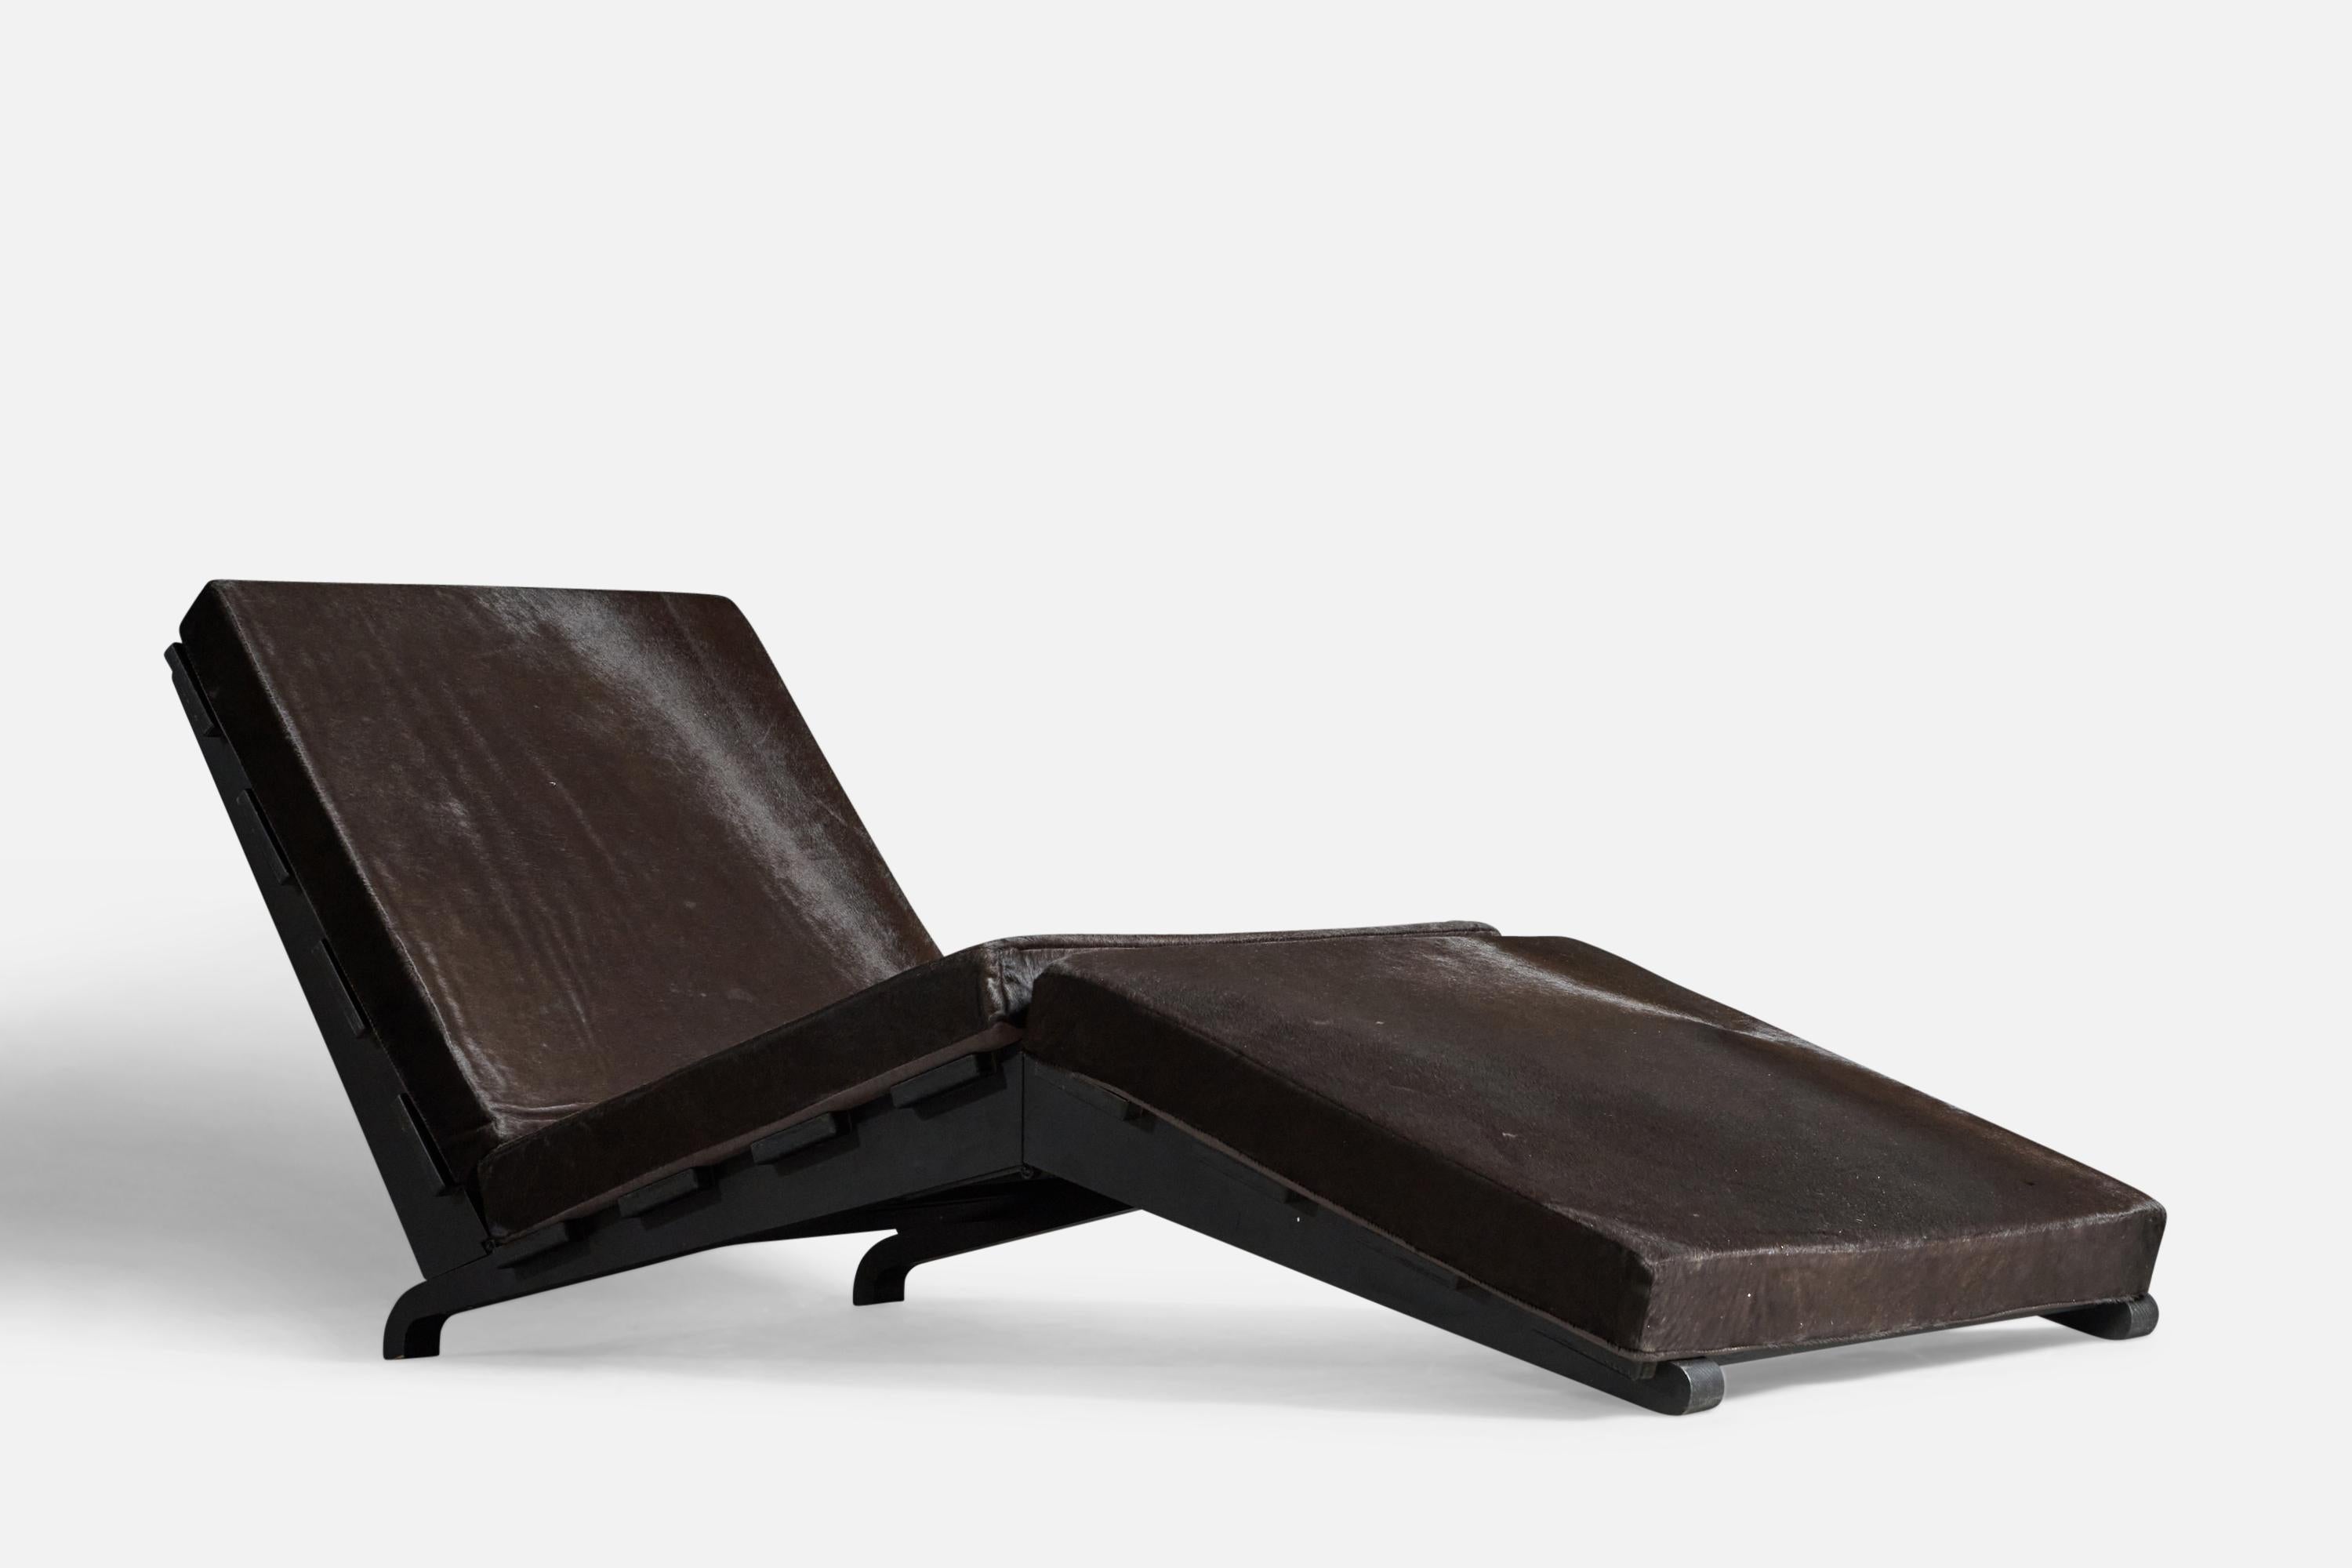 A foldable black painted wood and black cow hide chaise longue, designed and produced in Italy, c. 1980s.